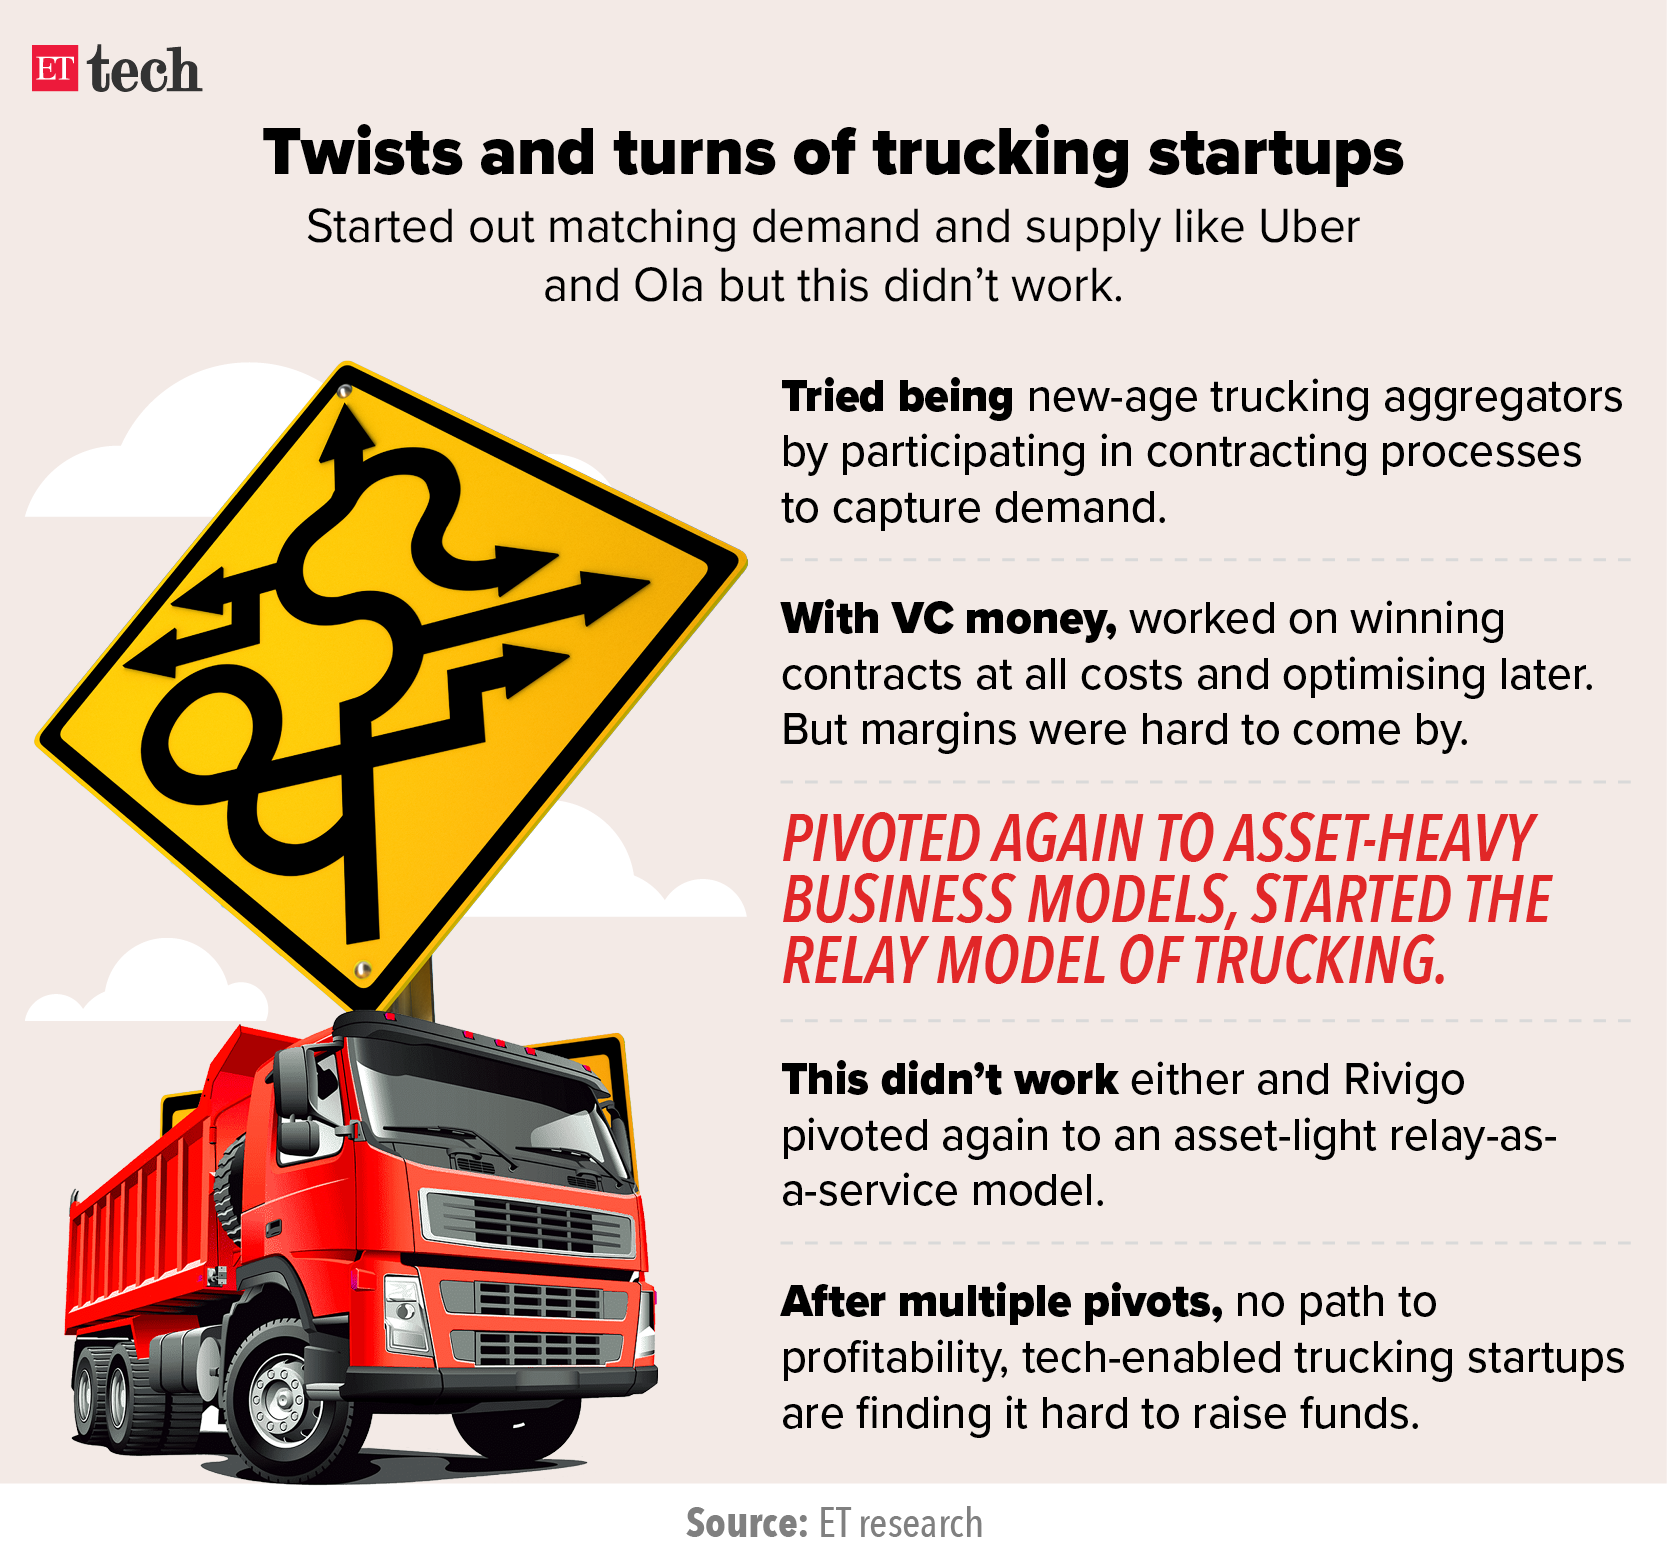 twists-and-turns-of-trucking-startups_graphic_ettech.